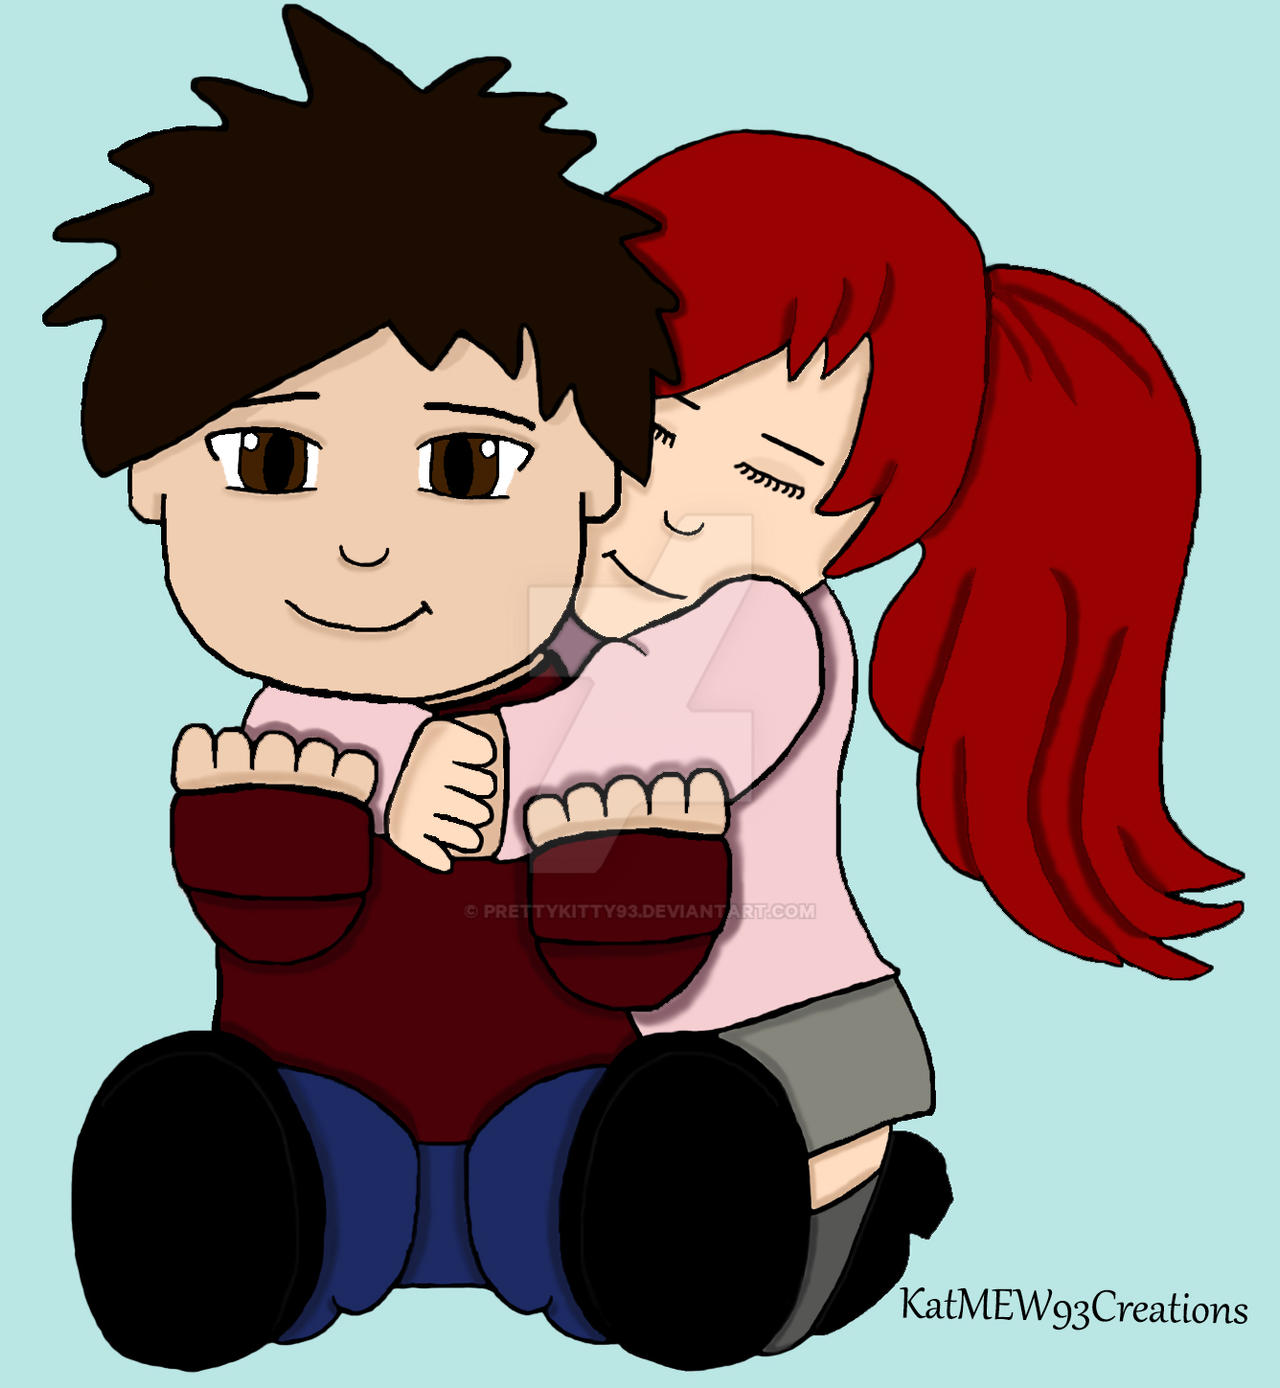 Anime Girl And Boy Hugging by PrettyKitty93 on DeviantArt